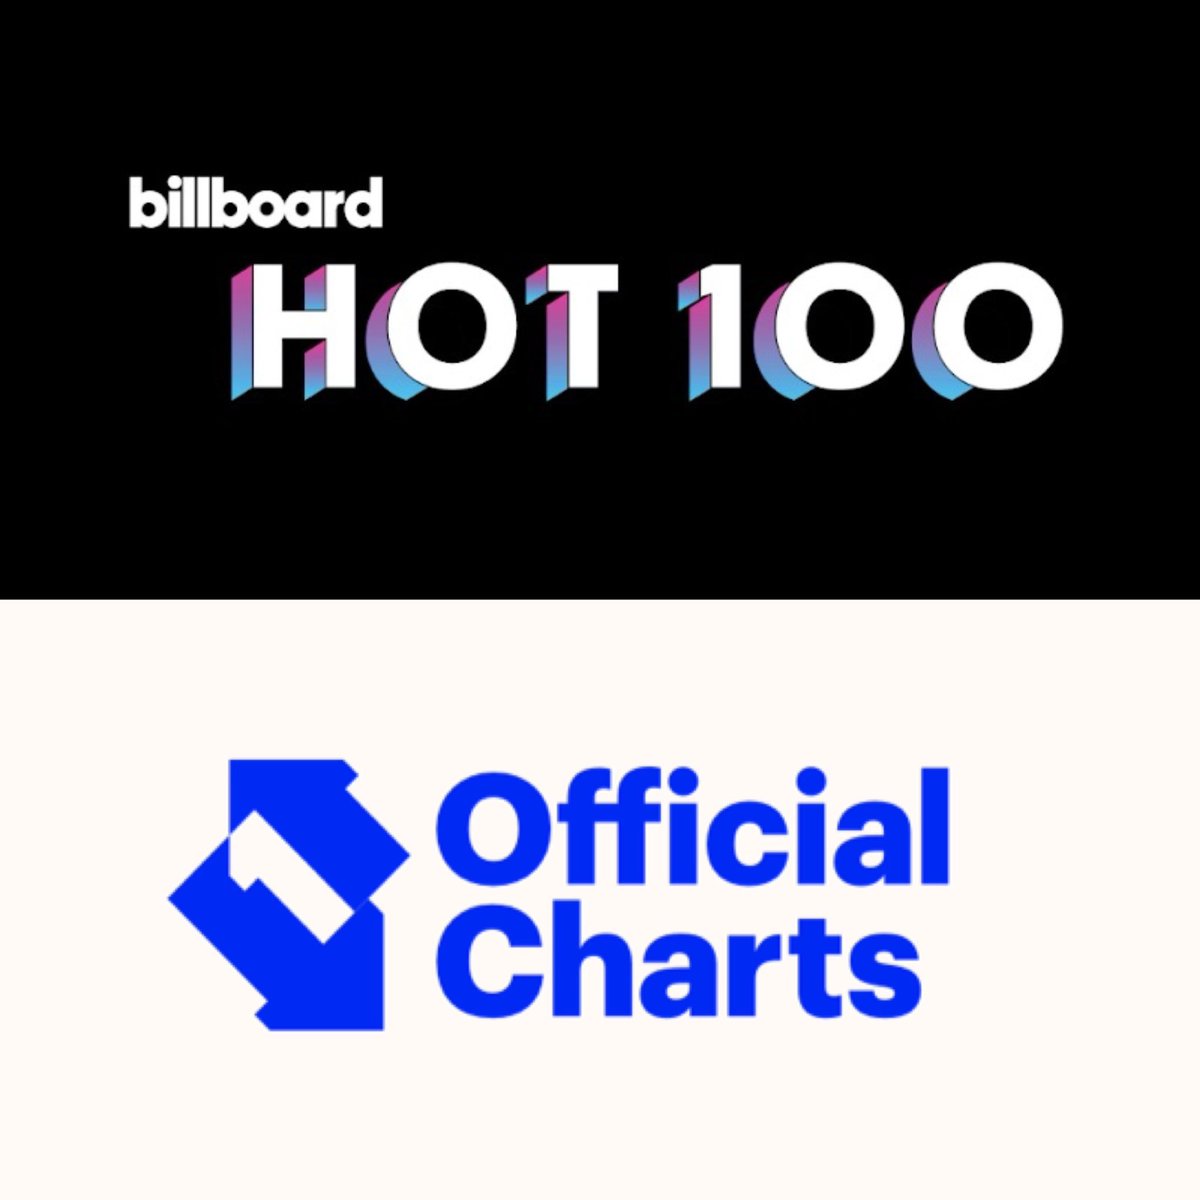 BTS are the only K-Pop group to have all members enter in both the Billboard Hot 100 and official UK singles chart!